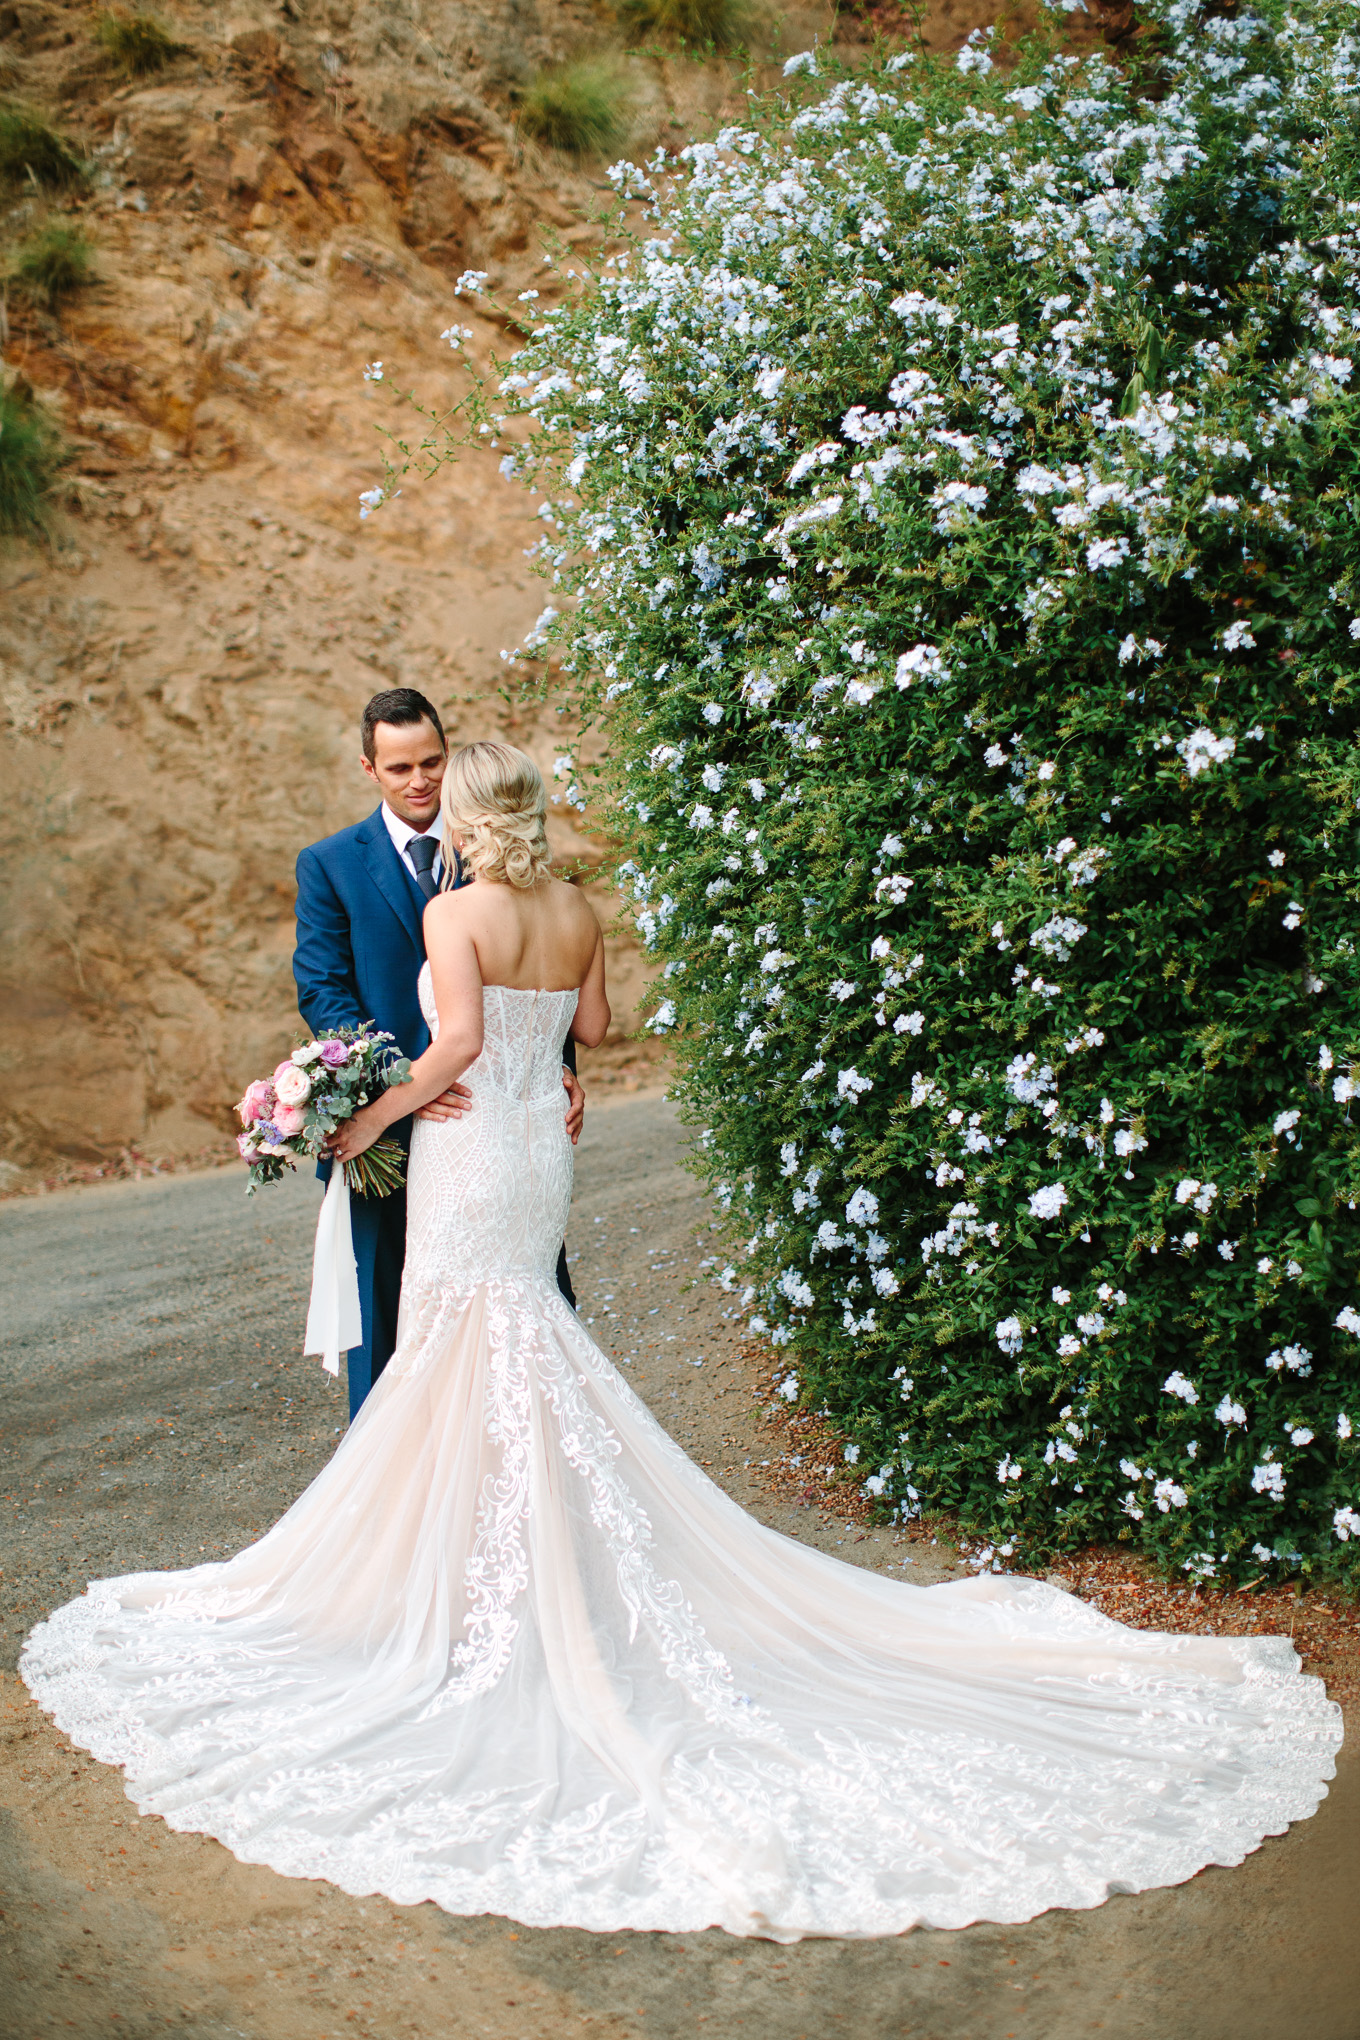 Bride and groom at Houdini Estate wedding | Best Southern California Garden Wedding Venues | Colorful and elevated wedding photography for fun-loving couples | #gardenvenue #weddingvenue #socalweddingvenue #bouquetideas #uniquebouquet   Source: Mary Costa Photography | Los Angeles 